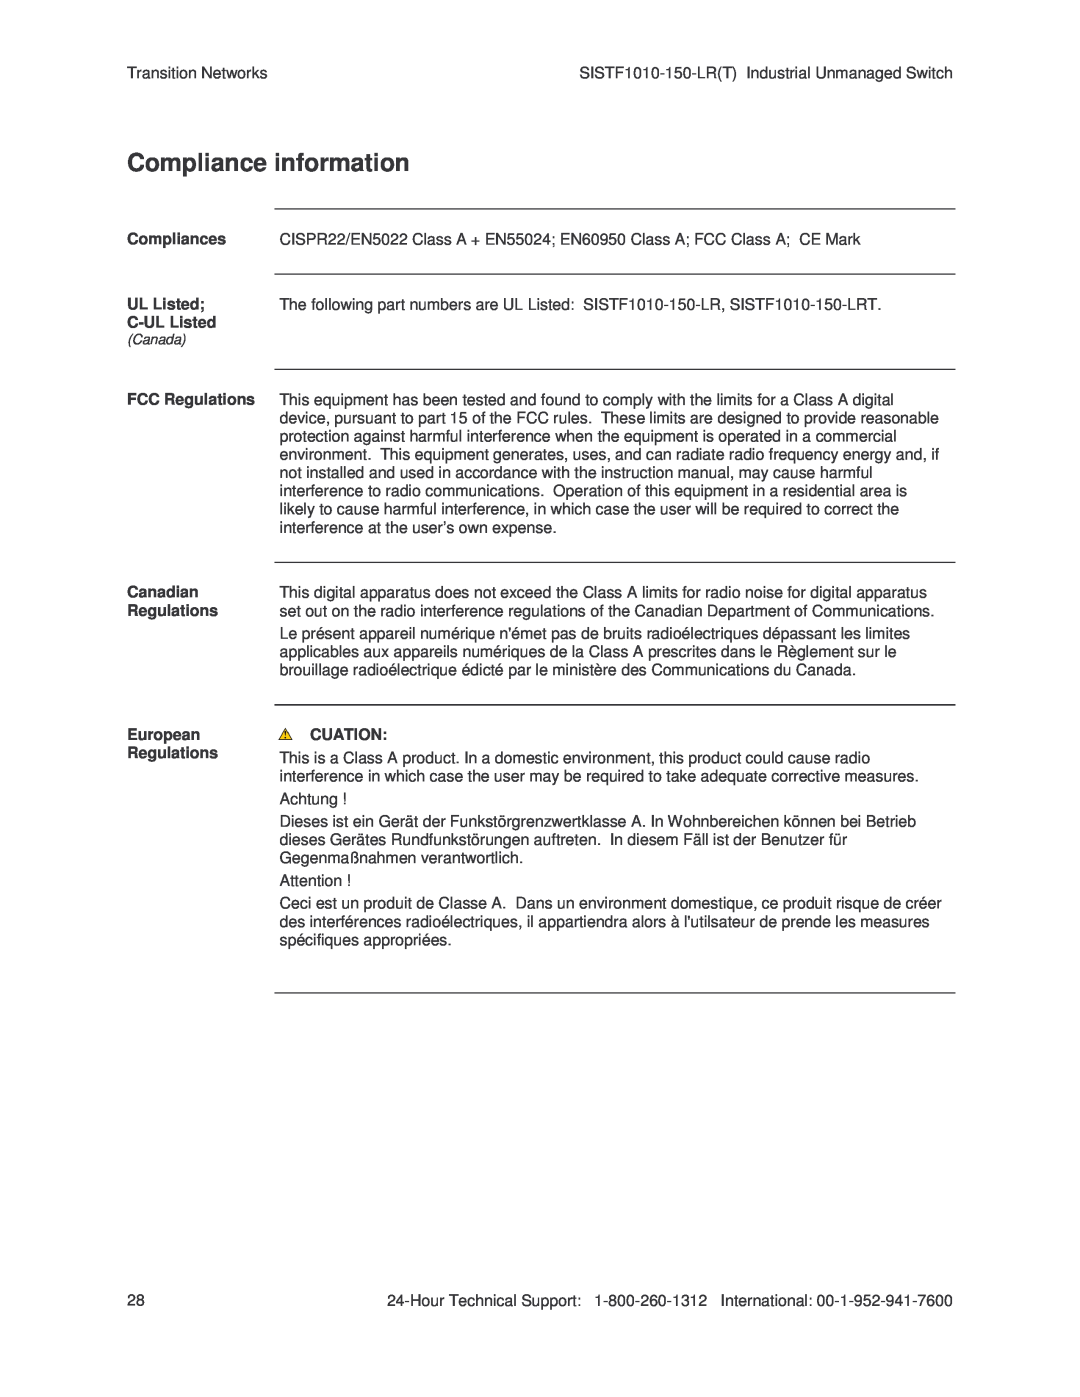 Transition Networks SISTF1010-150-LR(T) installation manual Compliance information 